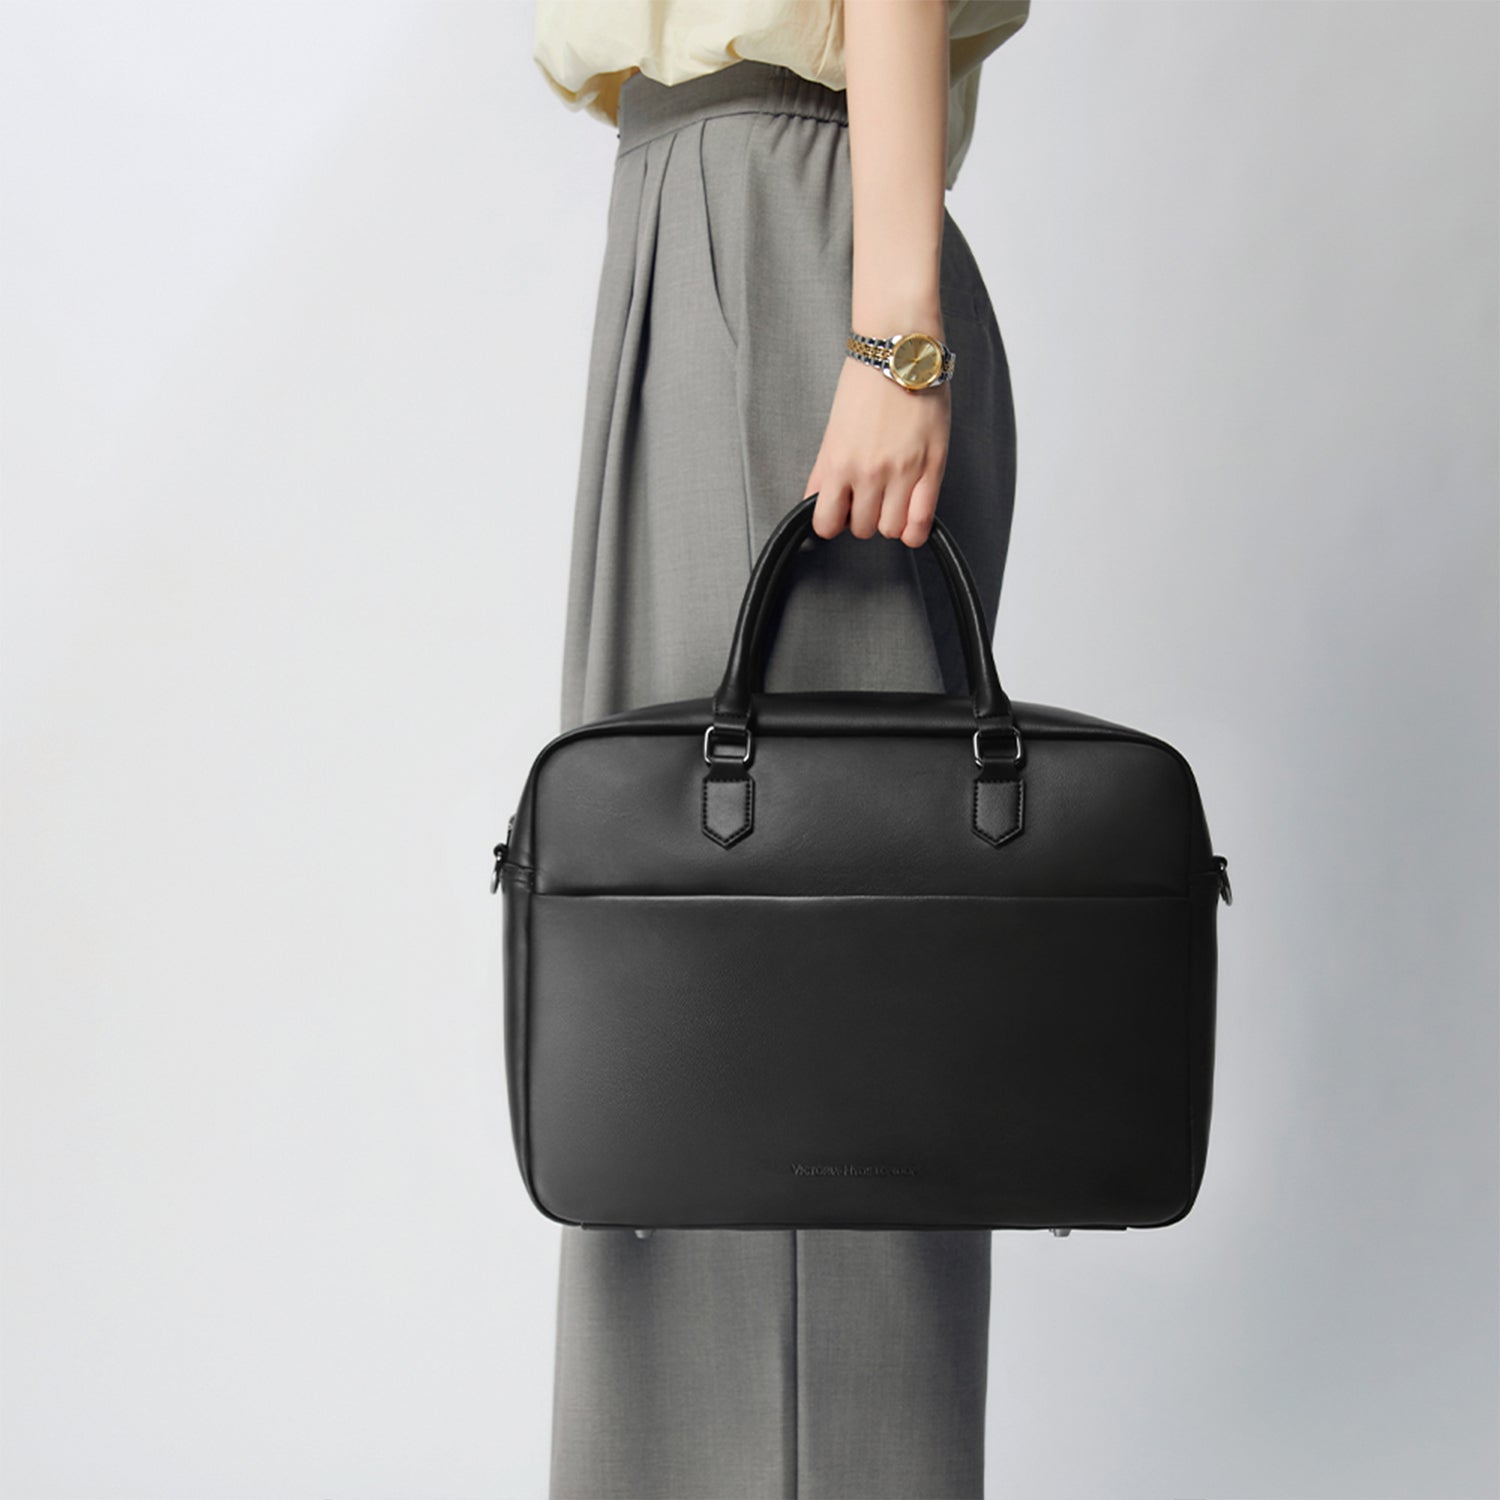 Business-New Work Collection Unisex  Tote/Crossbody Bag  Black